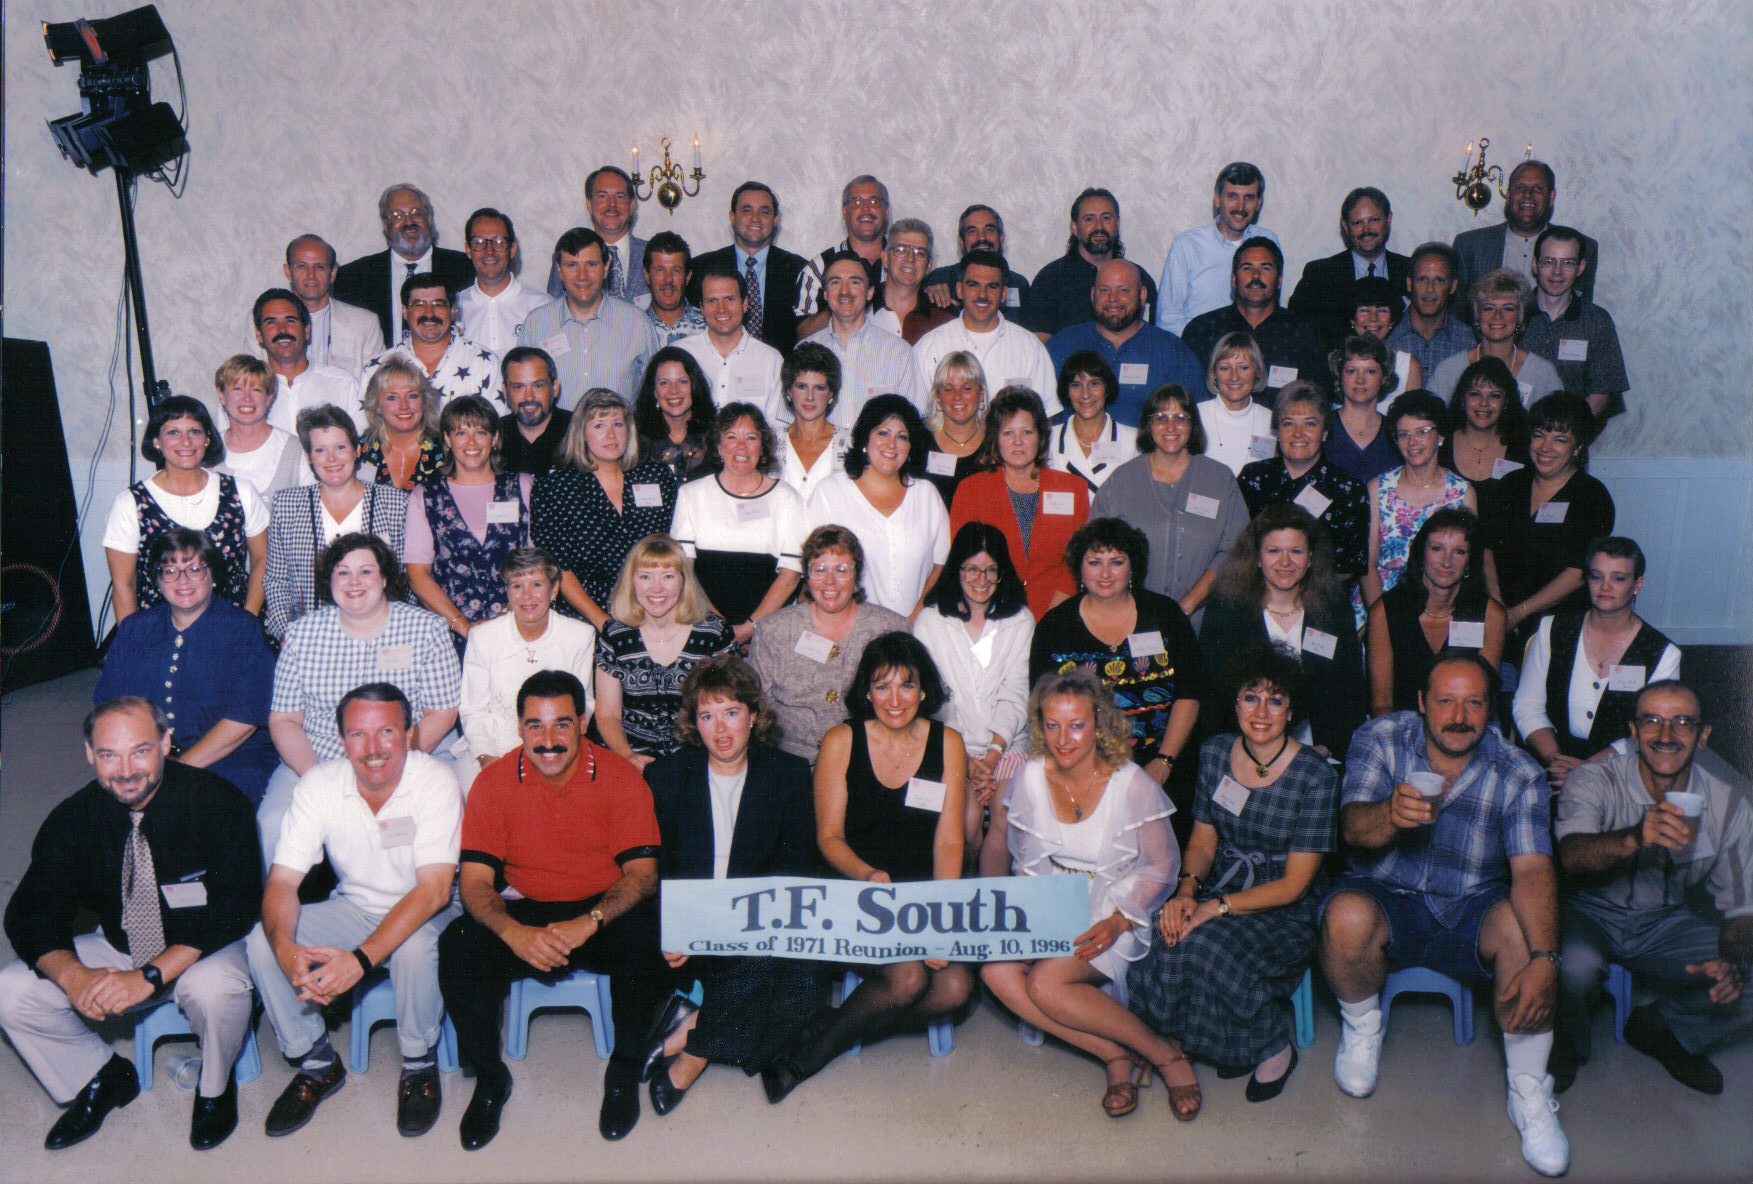 This is the 25 Year Reunion for the Class of 1971 from TFS